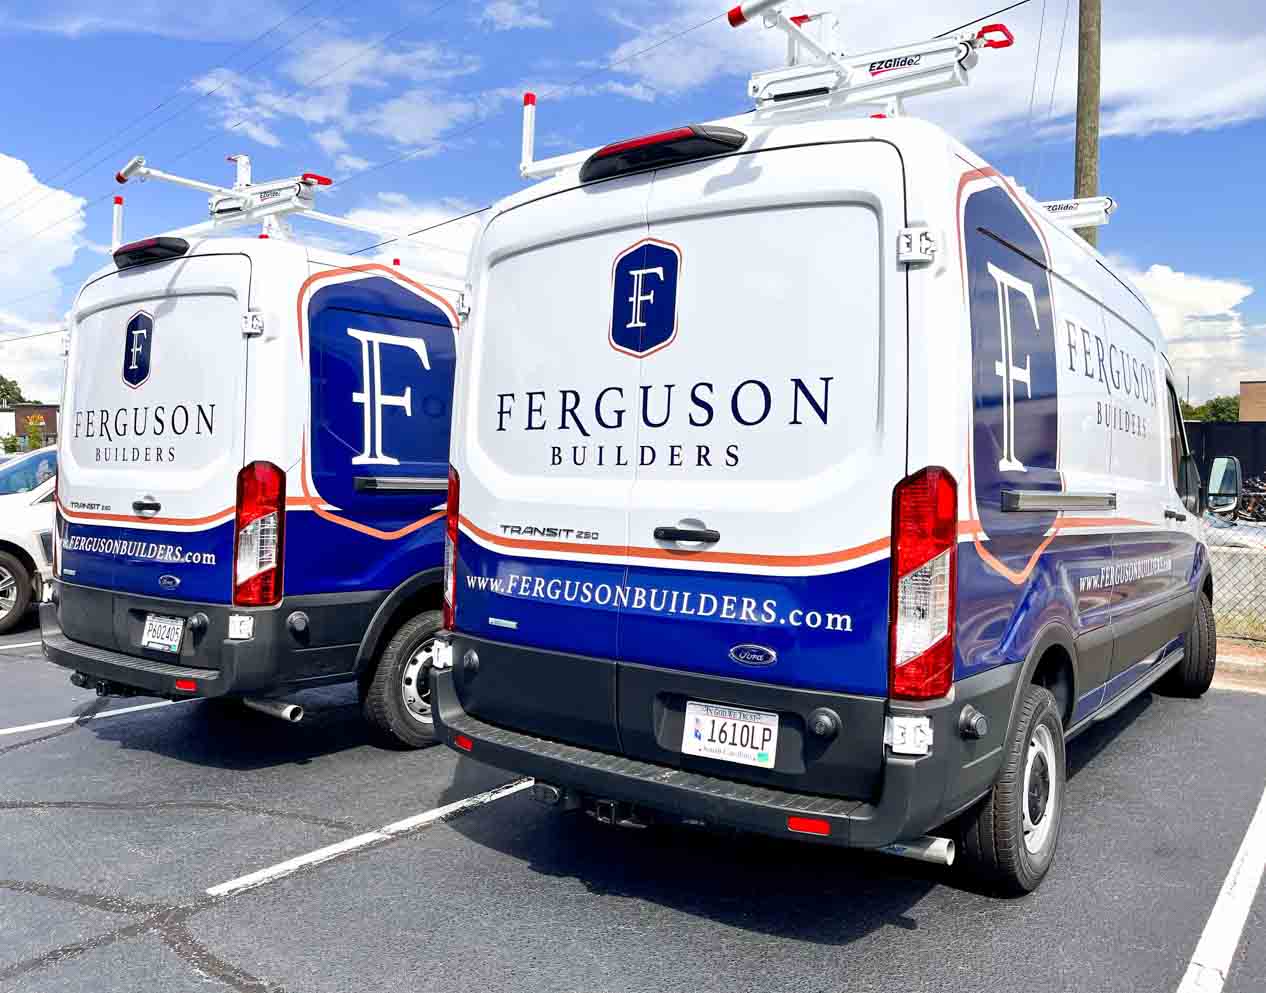 Ferguson fleet in partial wraps showcasing blue and gold colors and contact info.